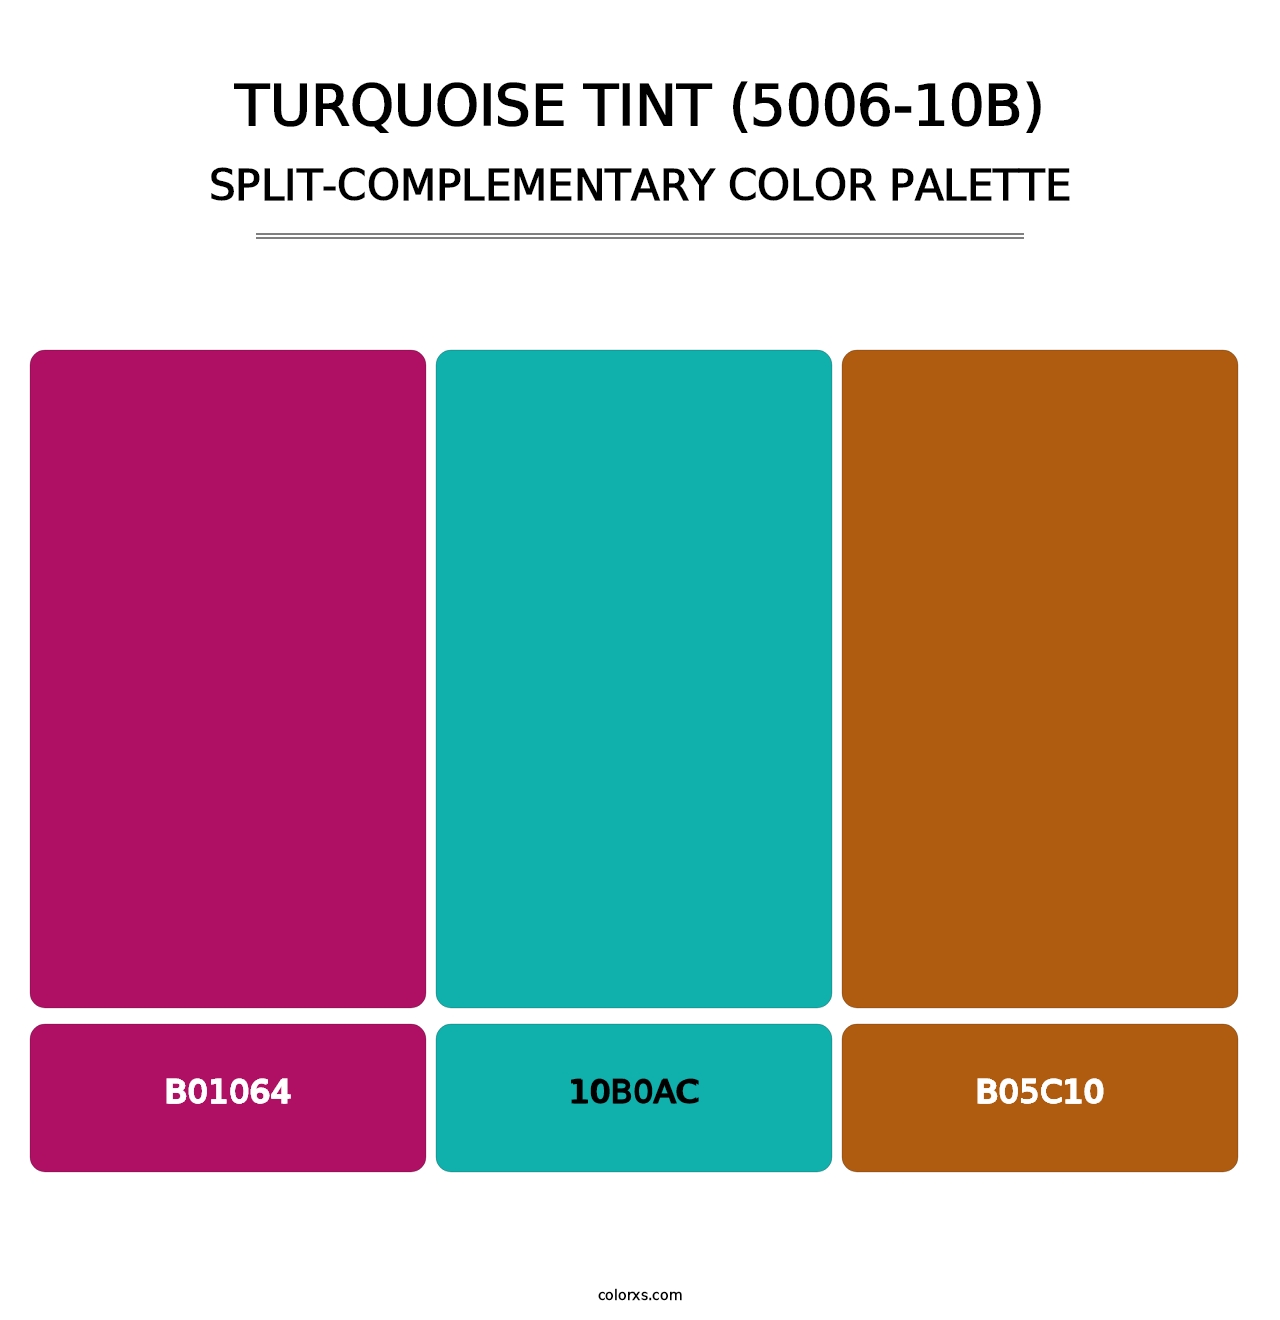 Turquoise Tint (5006-10B) - Split-Complementary Color Palette